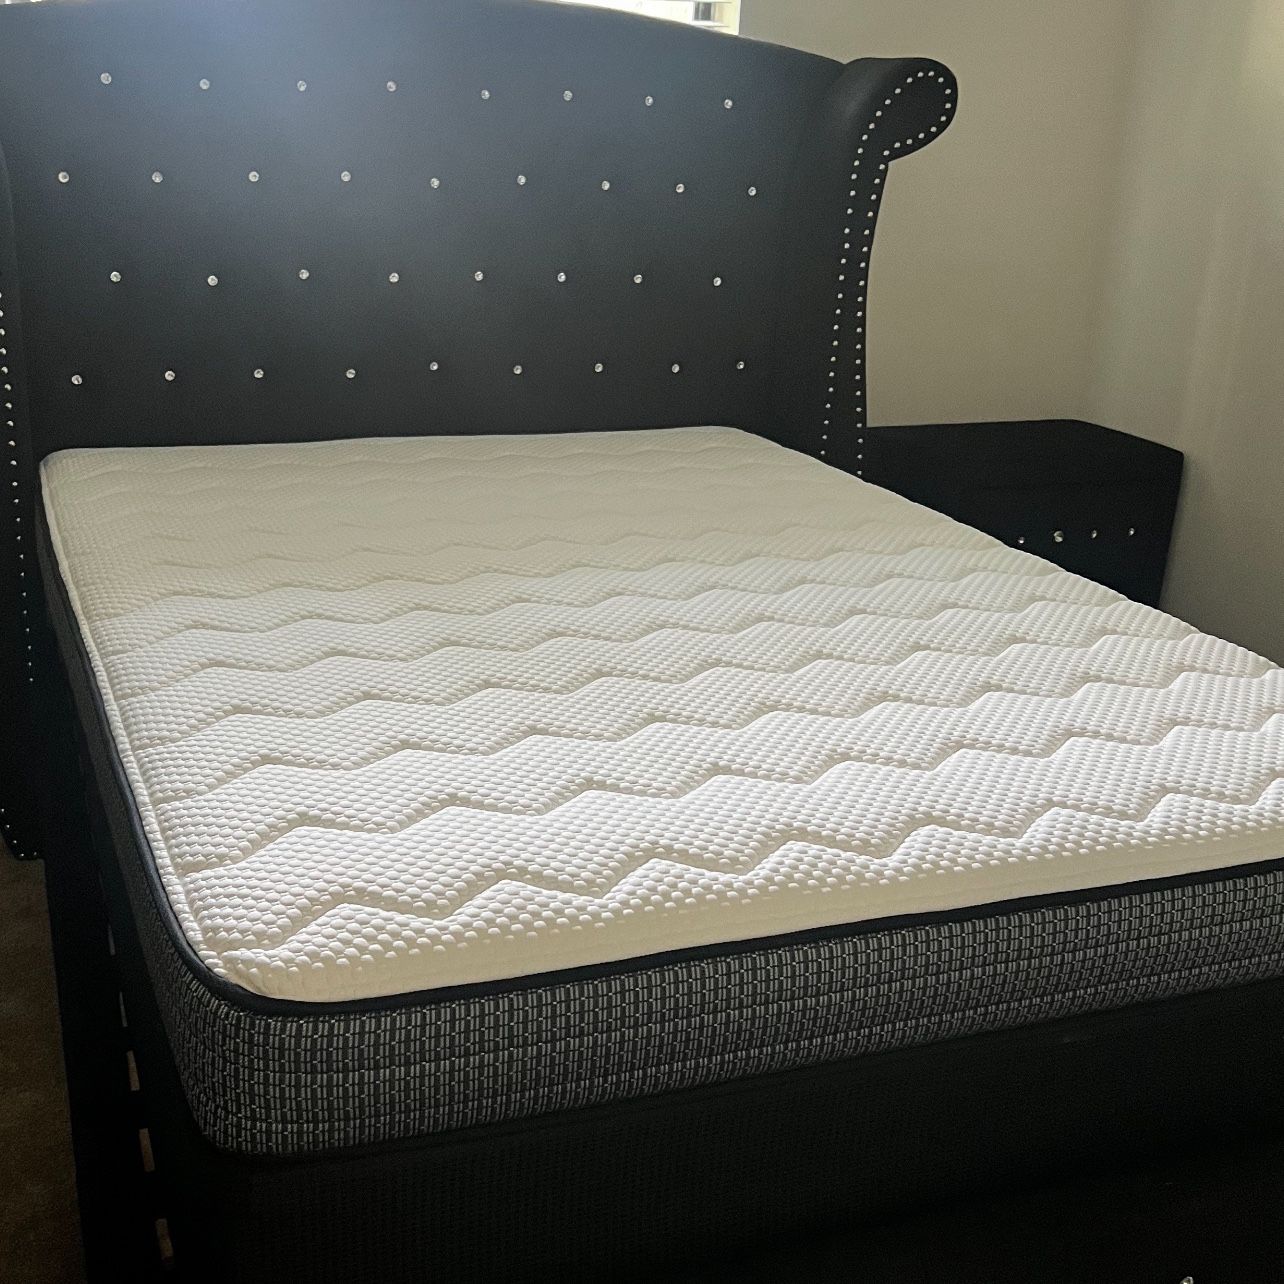 Brand New Mattresses! Same Day Delivery Available 